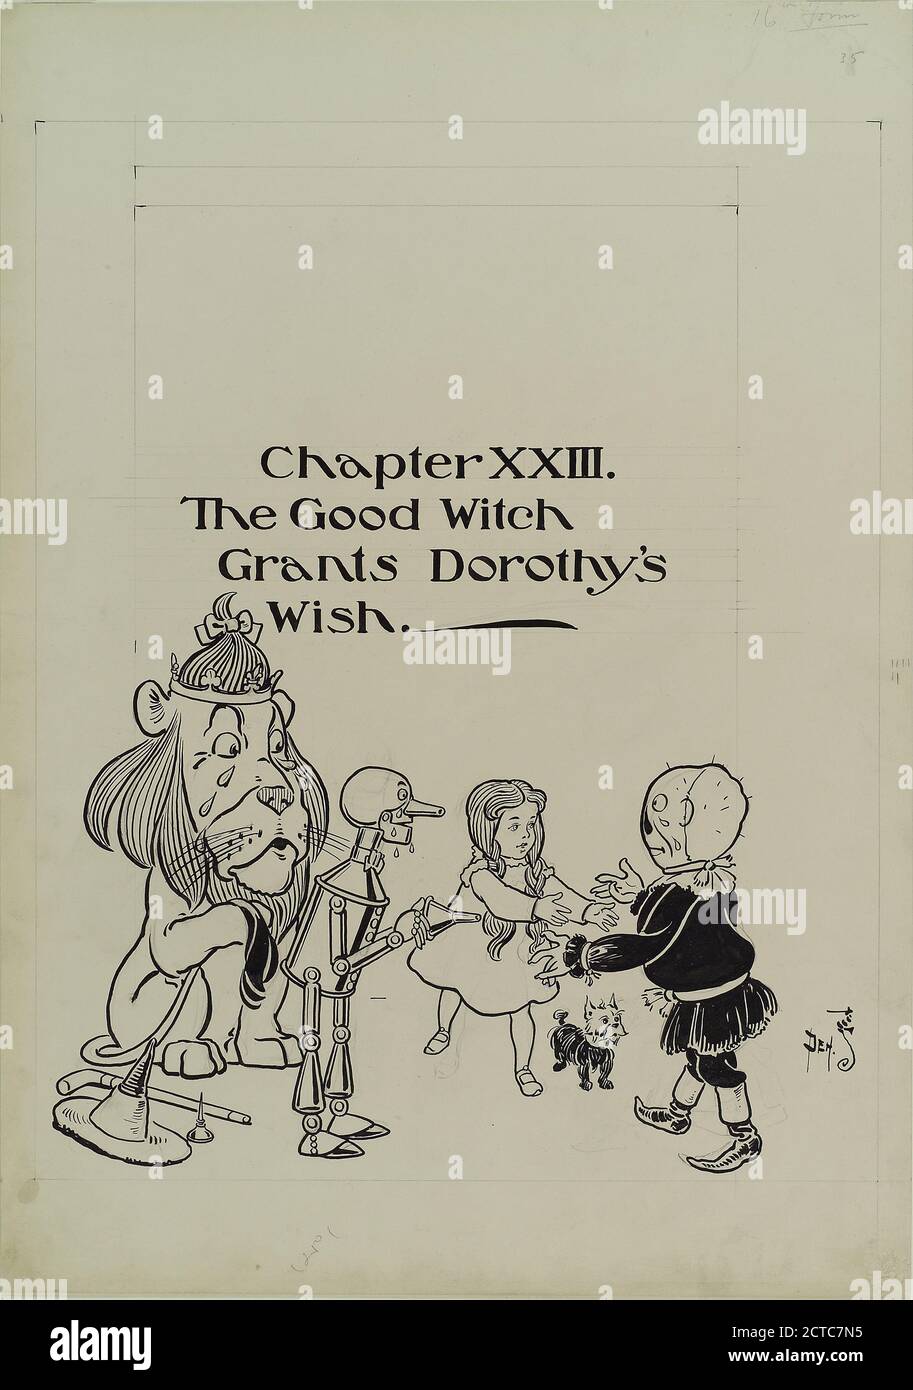 Chapitre XXIII. The Good Witch Grants Dorothy's Wish, STILL image, dessins, 1900, Denslow, W. (William Wallace), 1856-1915 Banque D'Images